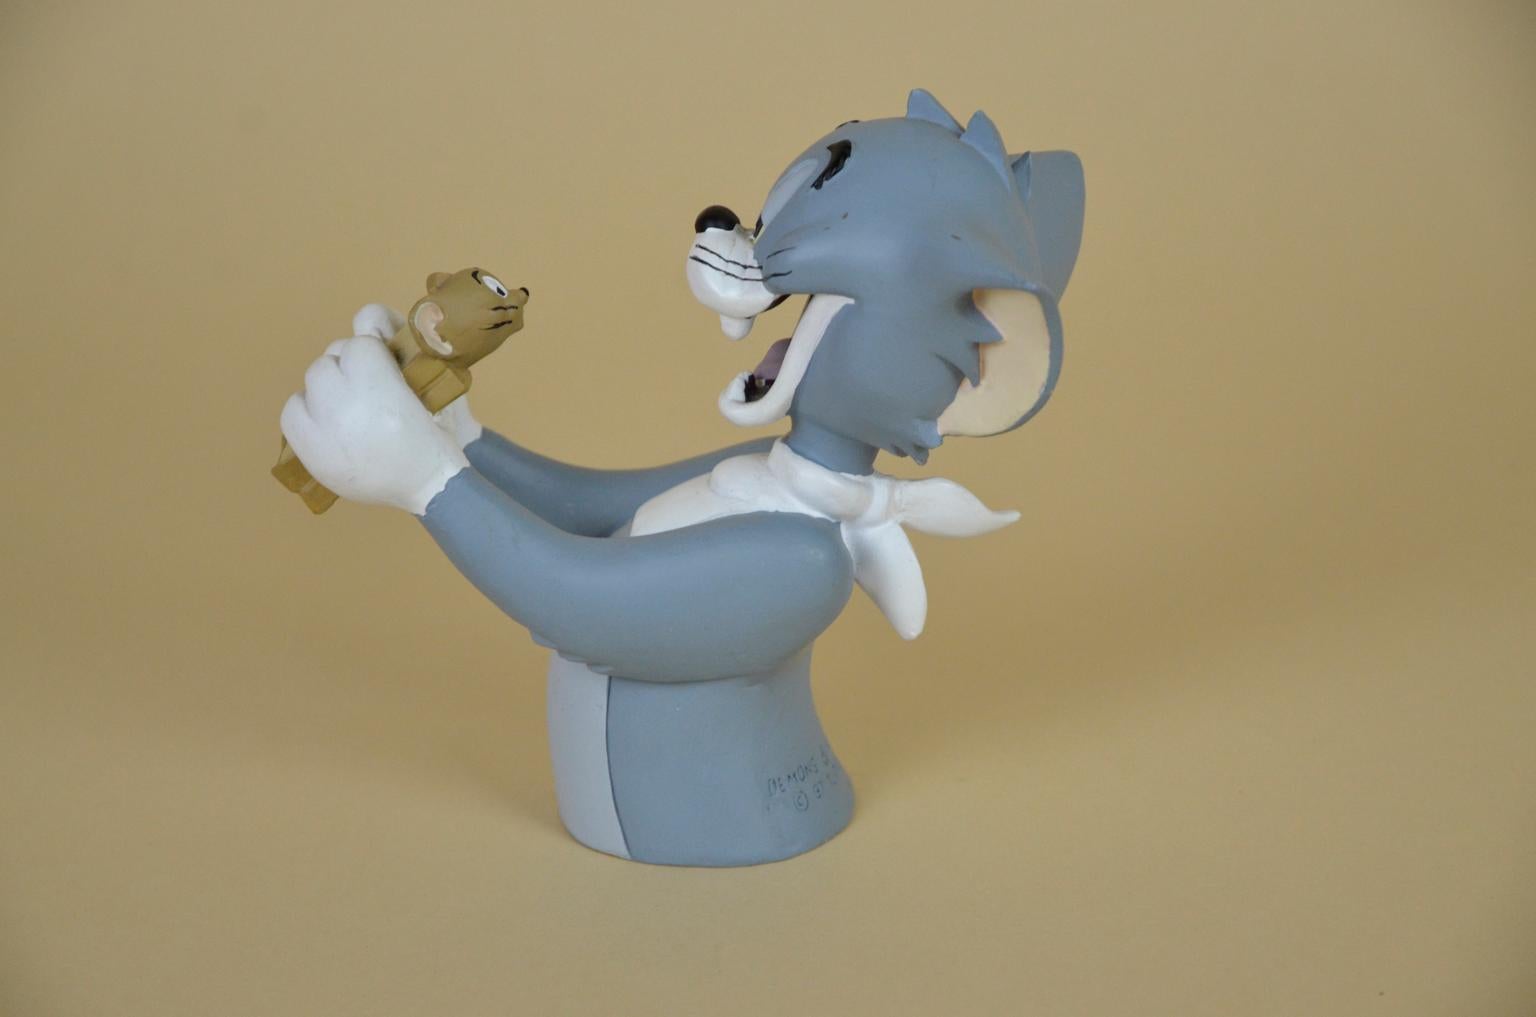 Hand-Painted 1990s French Vintage Hanna-Barbera Tom and Jerry Statue by Demons & Merveilles For Sale